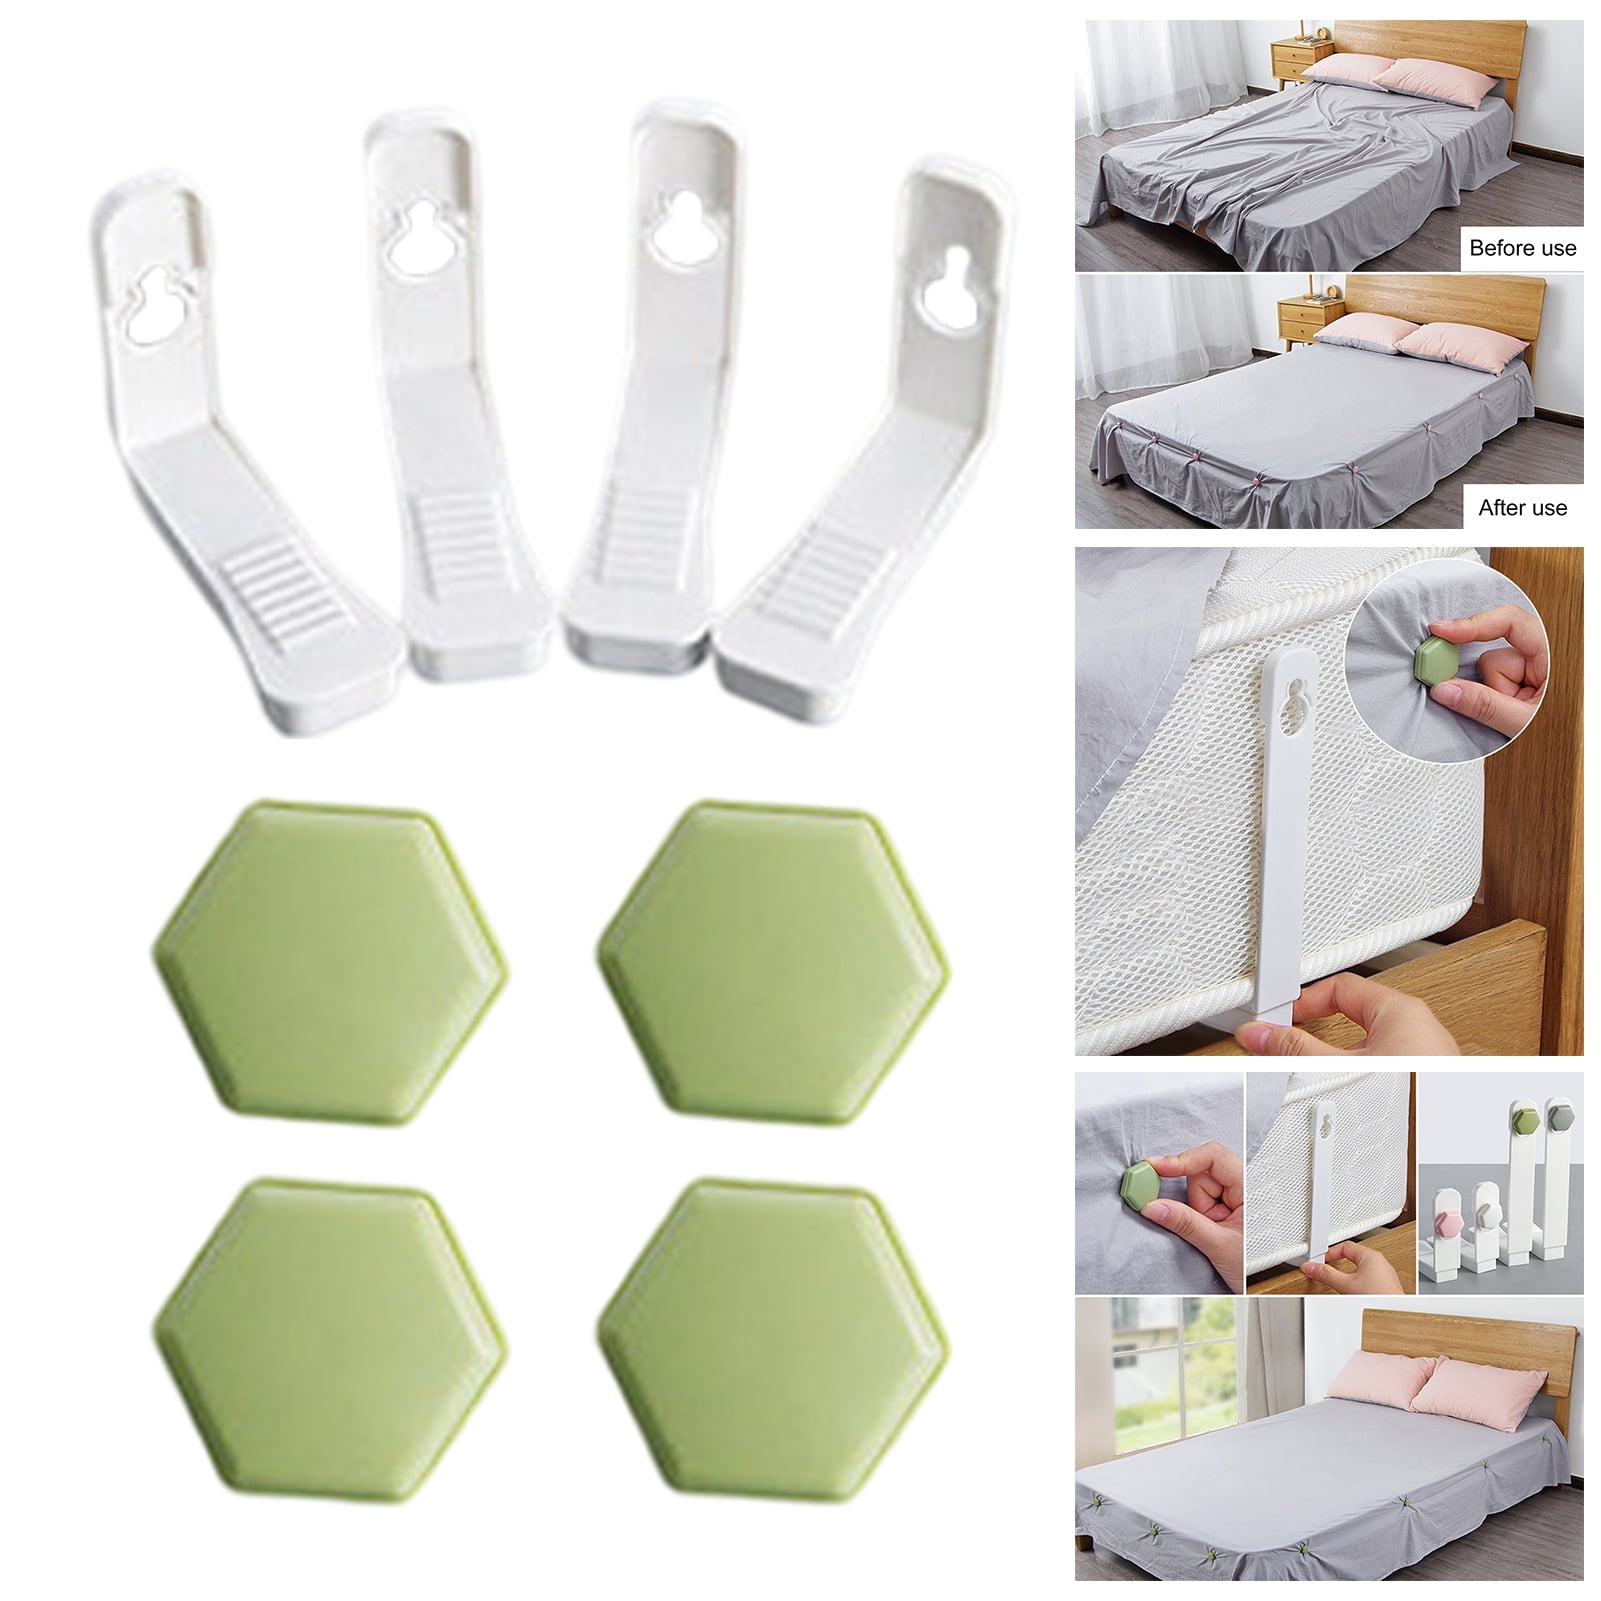 Kasom Bed Sheet Grippers Fasteners Bed Sheet Clips Keep Sheets Snug(10  Pieces,White)